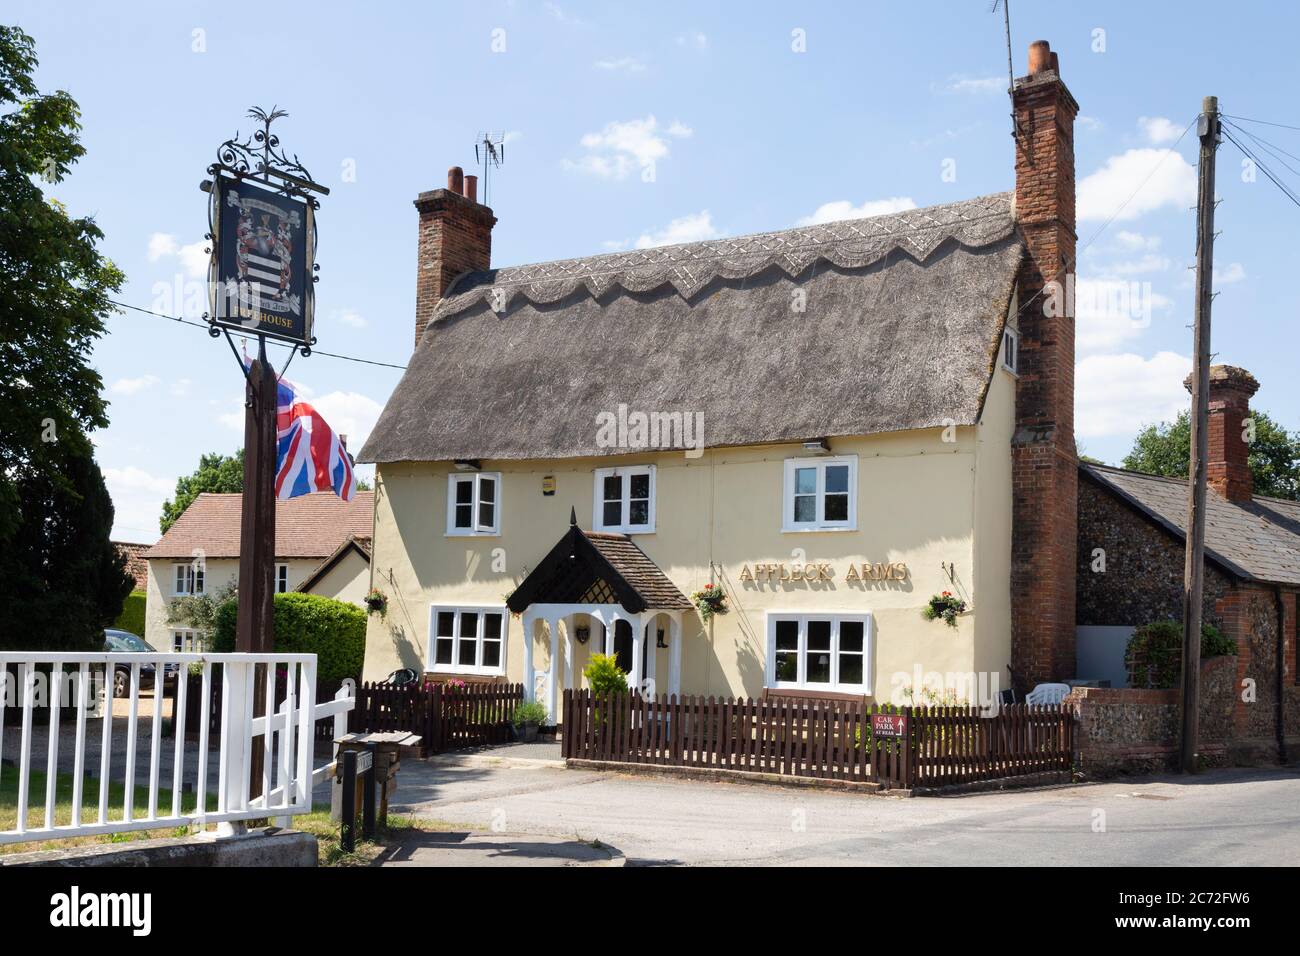 The Affleck Arms, an English Village country pub in the Suffolk village of Dalham on a sunny day in summer; Dalham Suffolk UK Stock Photo